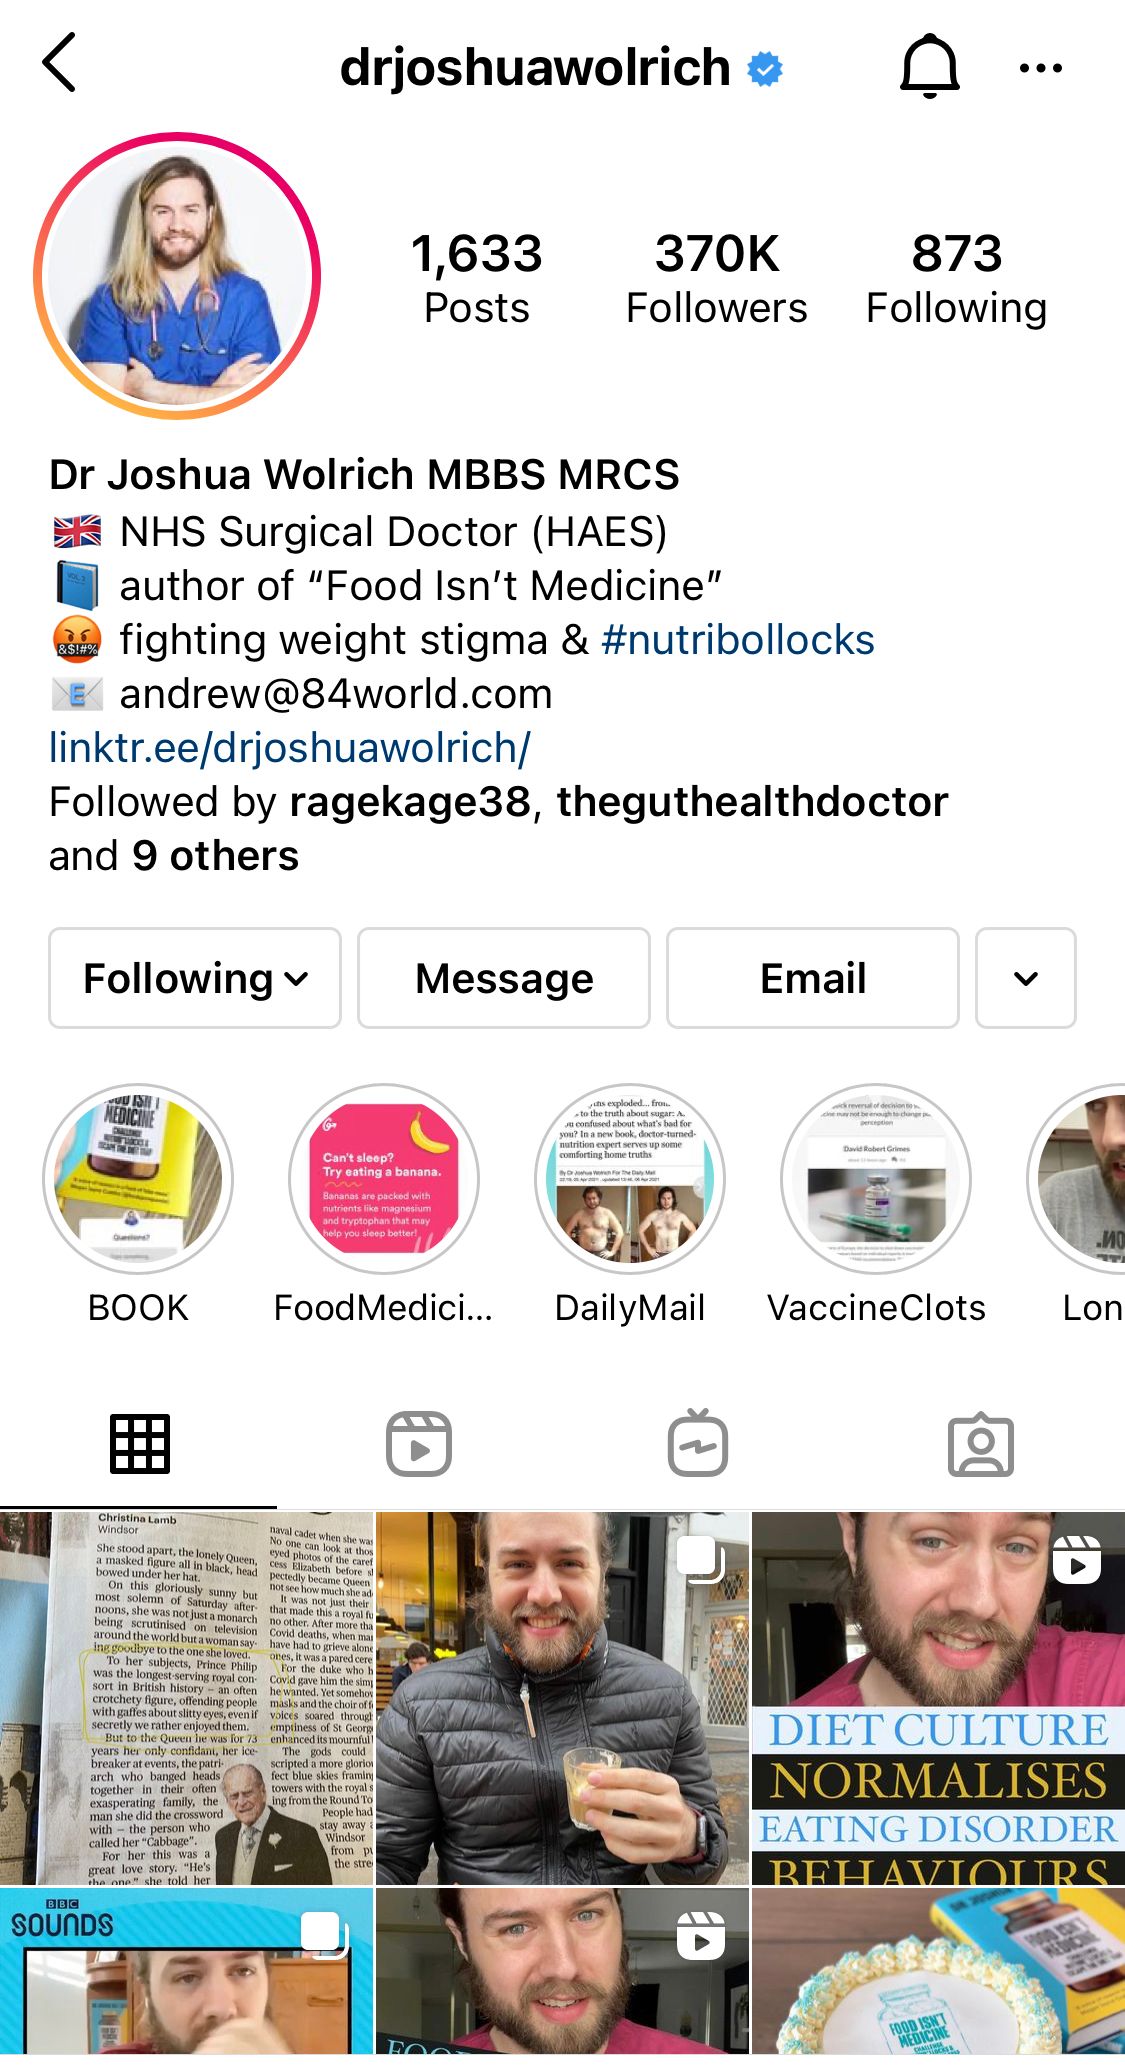 Dr. Joshua Wolrich’s Instagram page, which highlights his credentials and causes in his bio